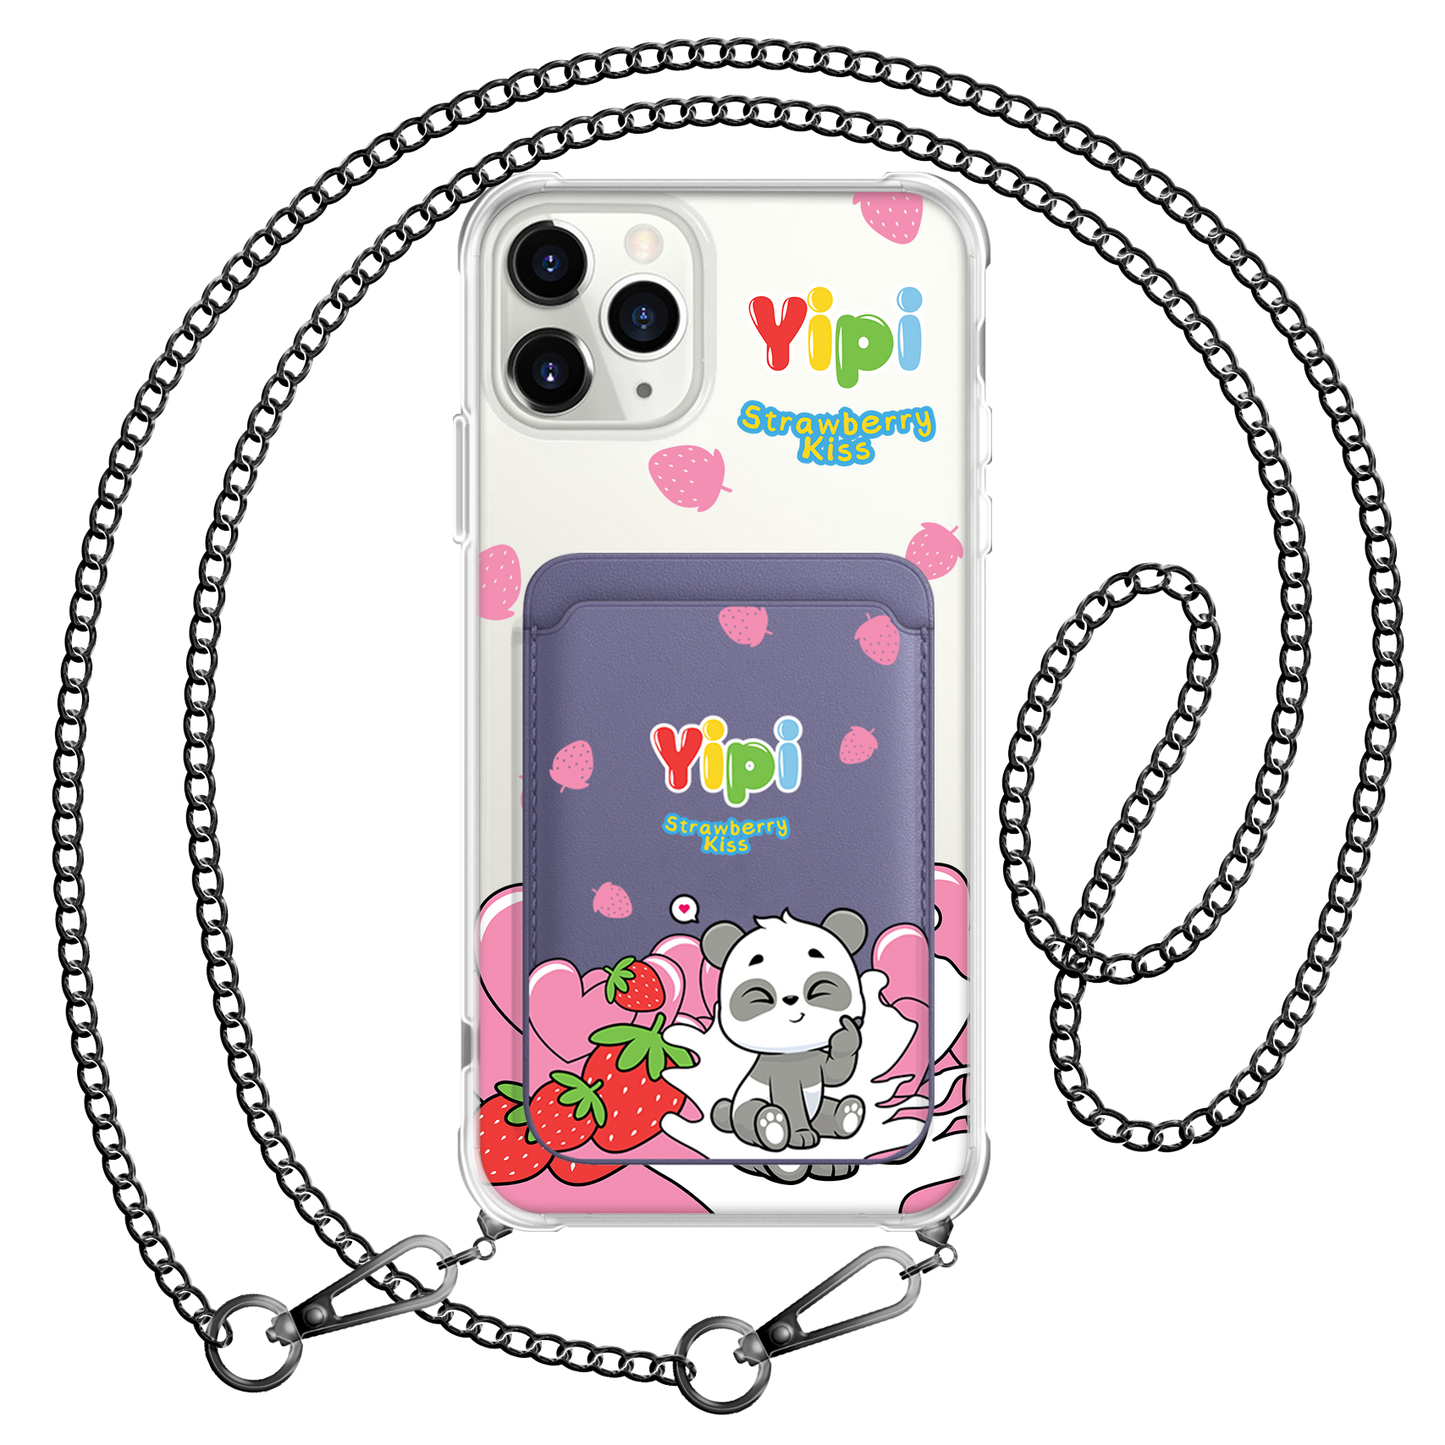 iPhone Magnetic Wallet Case - Yipi Strawberry Kiss